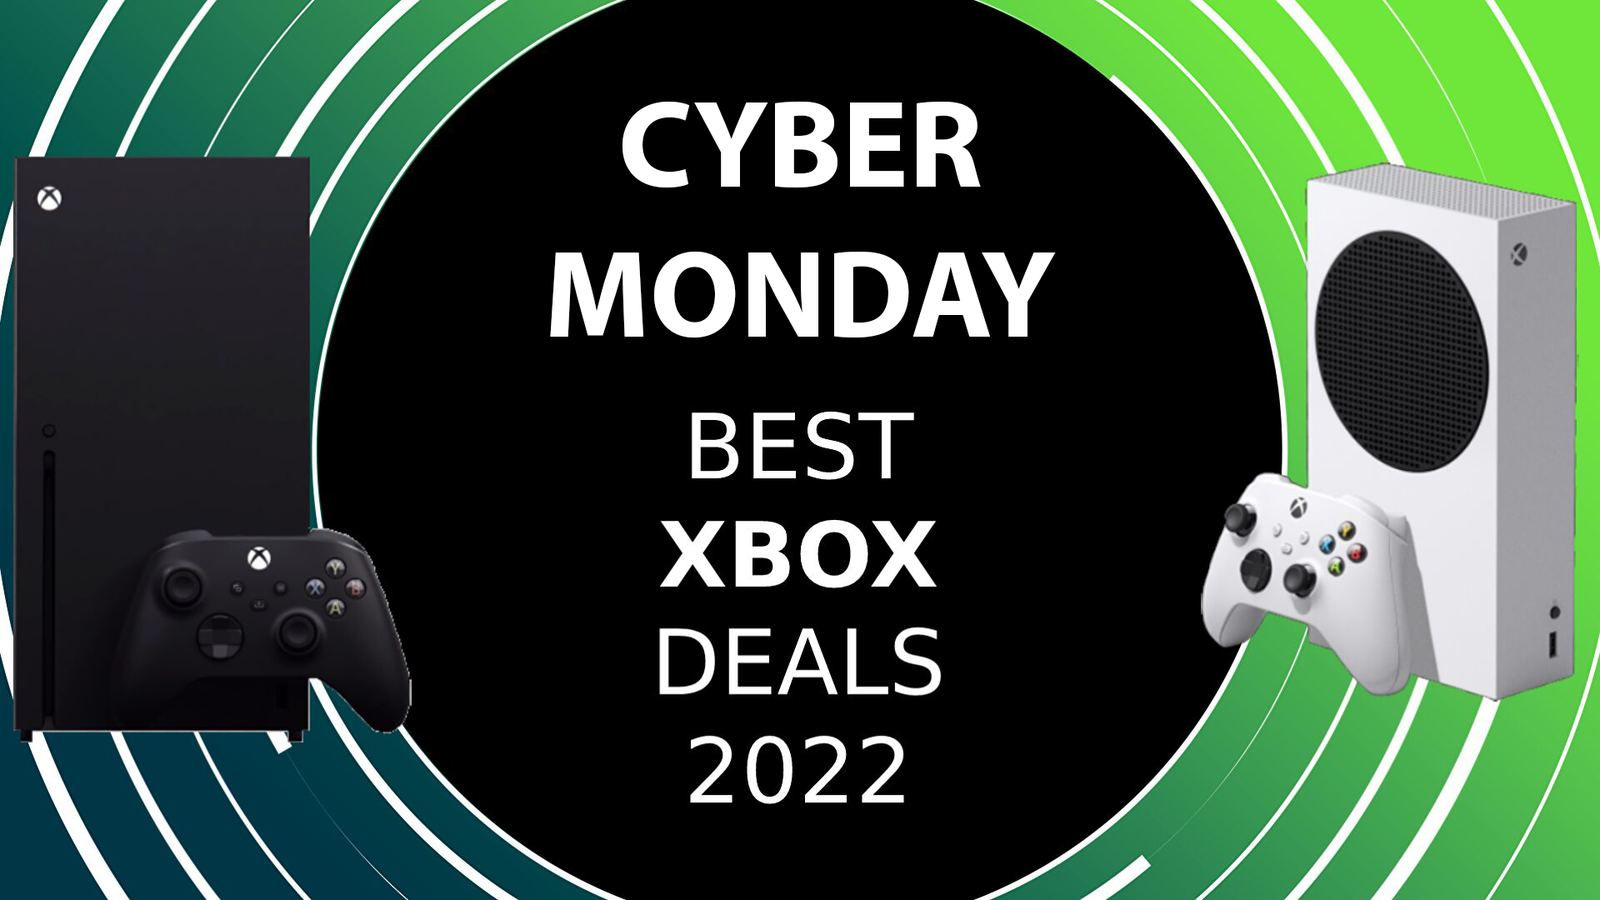 Aventurarse Resistente ilegal Cyber Monday Xbox deals 2022: best offers and discounts | Eurogamer.net